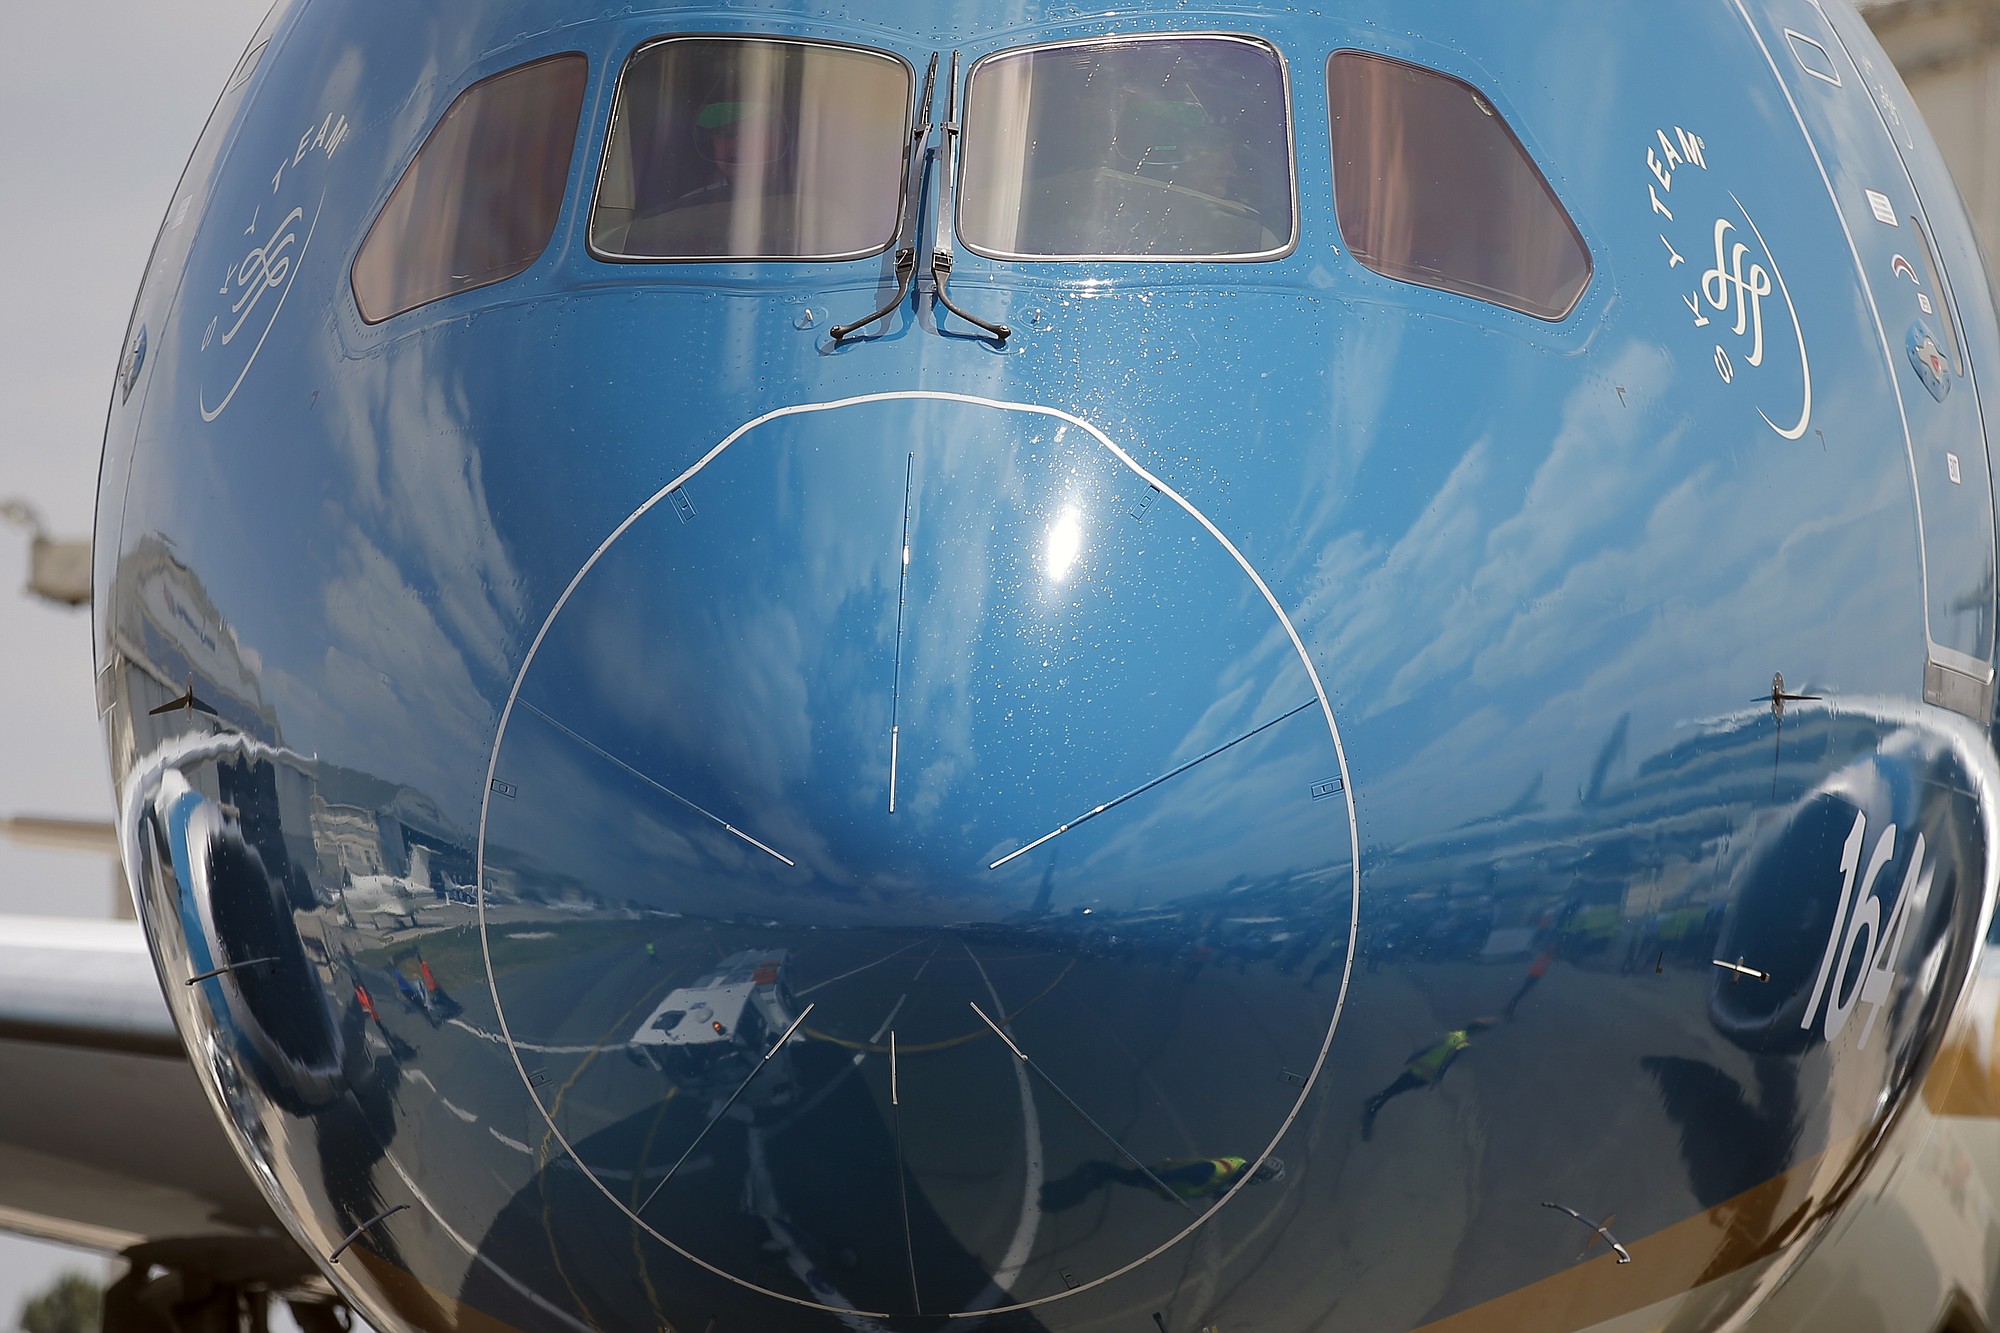 Associated Press files
A Boeing 787 Dreamliner prepares for its demonstration flight at the Paris Air Show at Le Bourget airport, north of Paris last month.